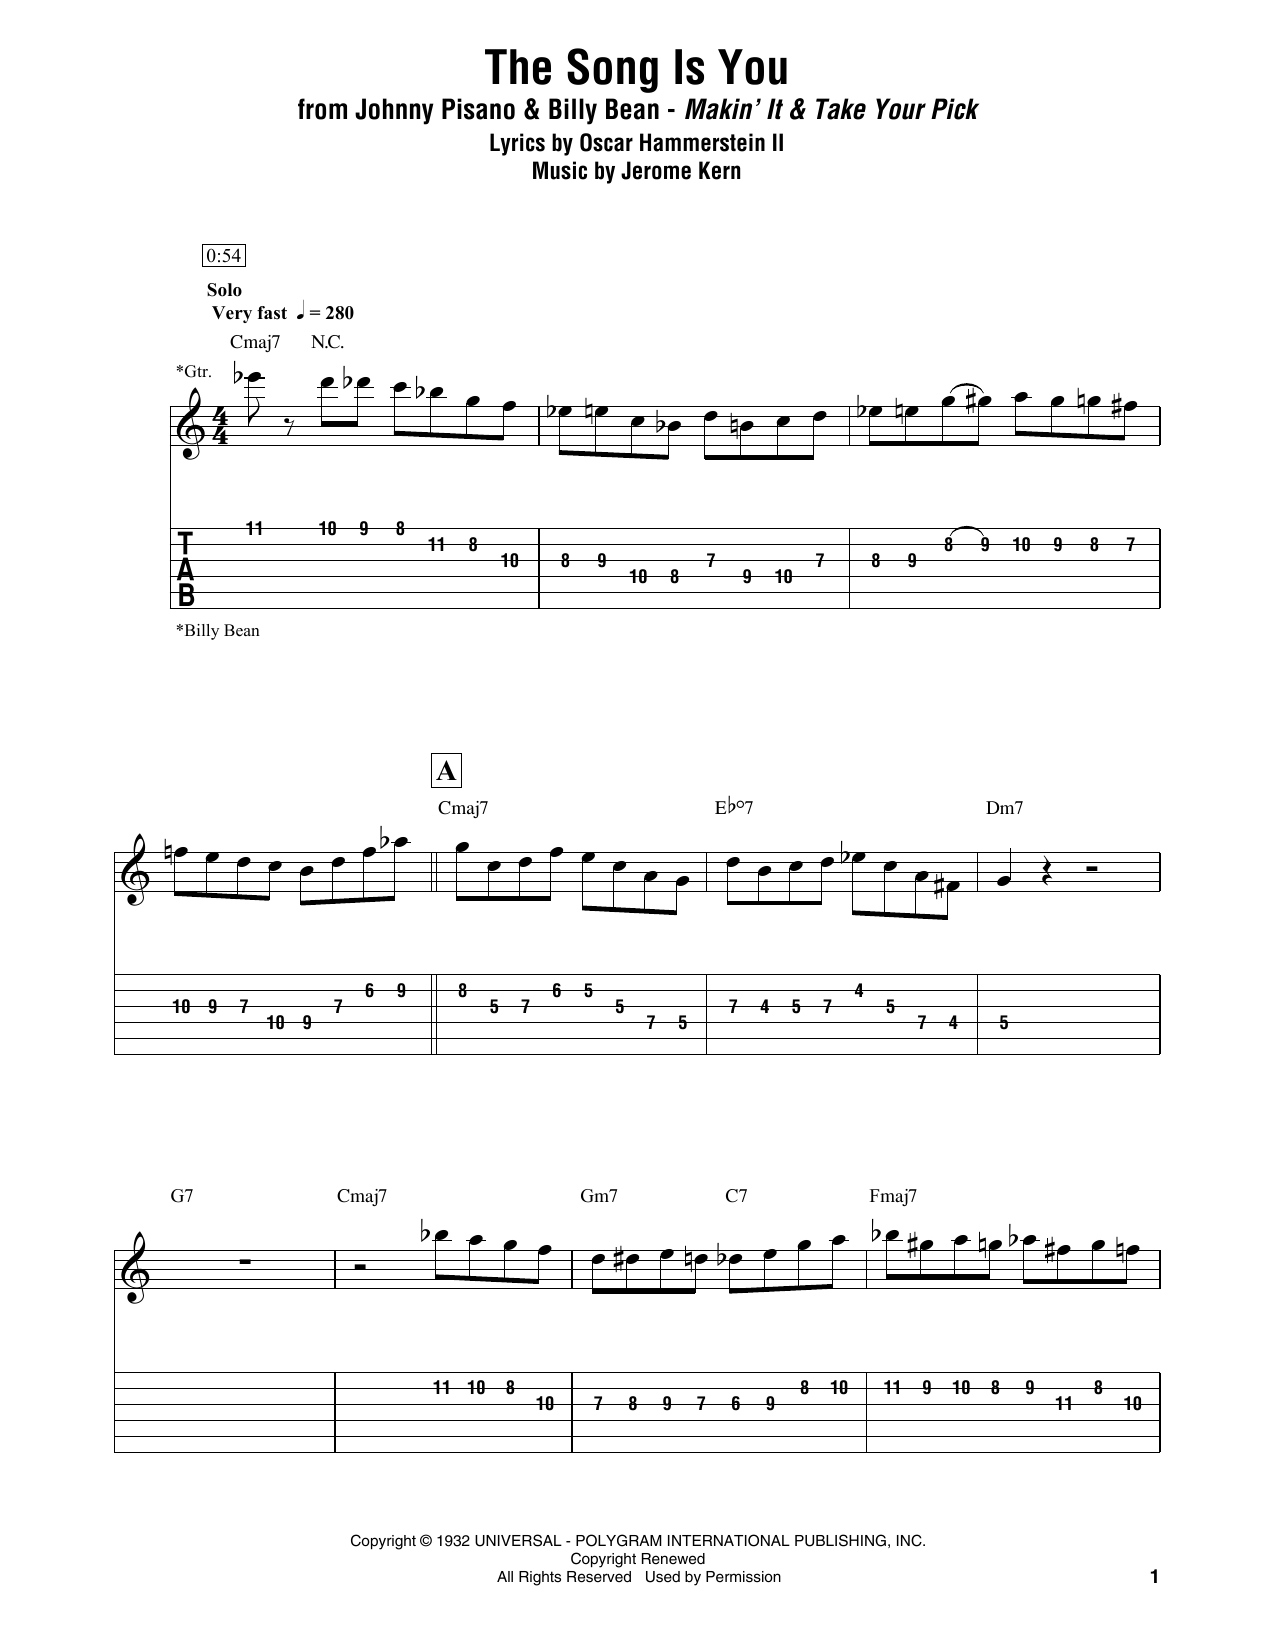 Download Johnny Pisano & Billy Bean The Song Is You Sheet Music